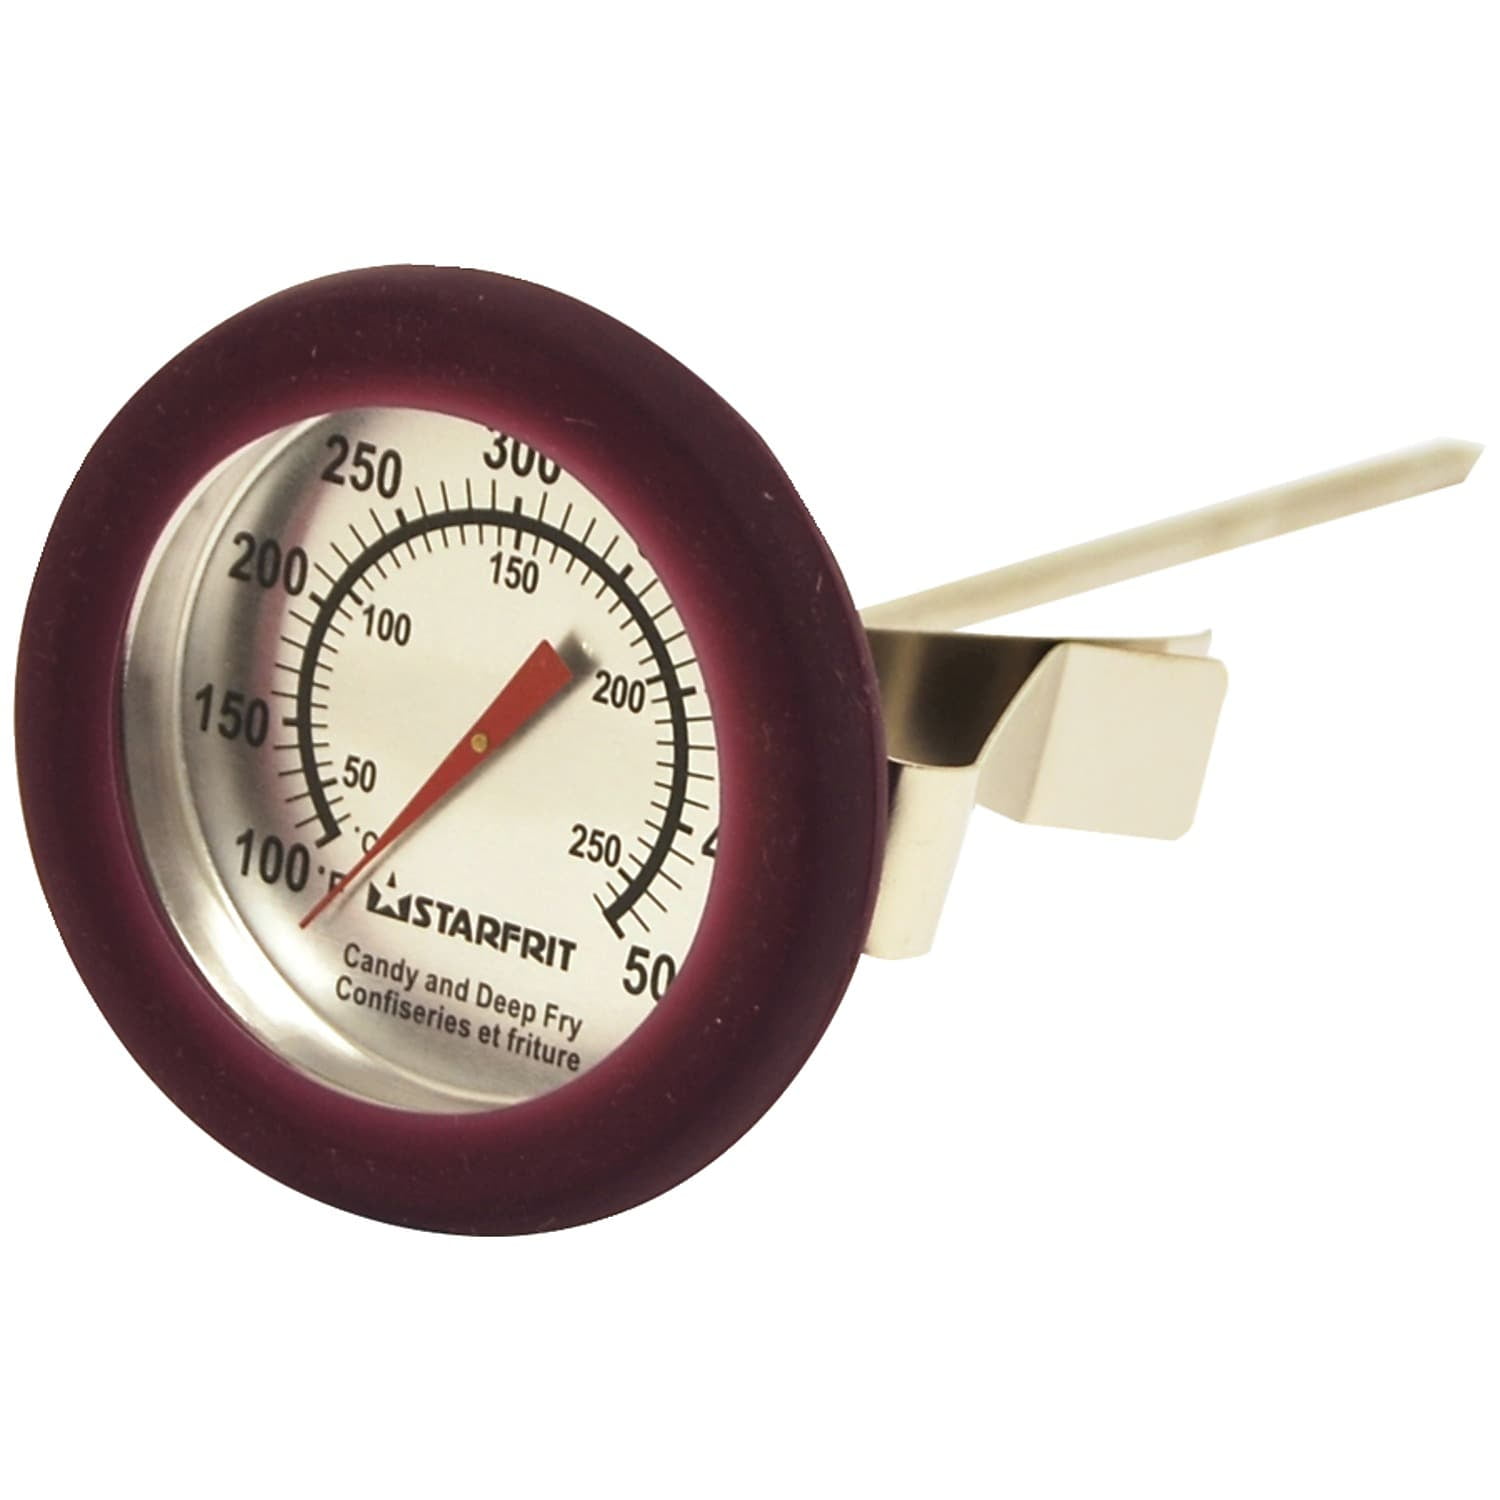 USA SELLER CANDY/DEEP FRY THERMOMETER 6 FREE SHIPPING US ONLY